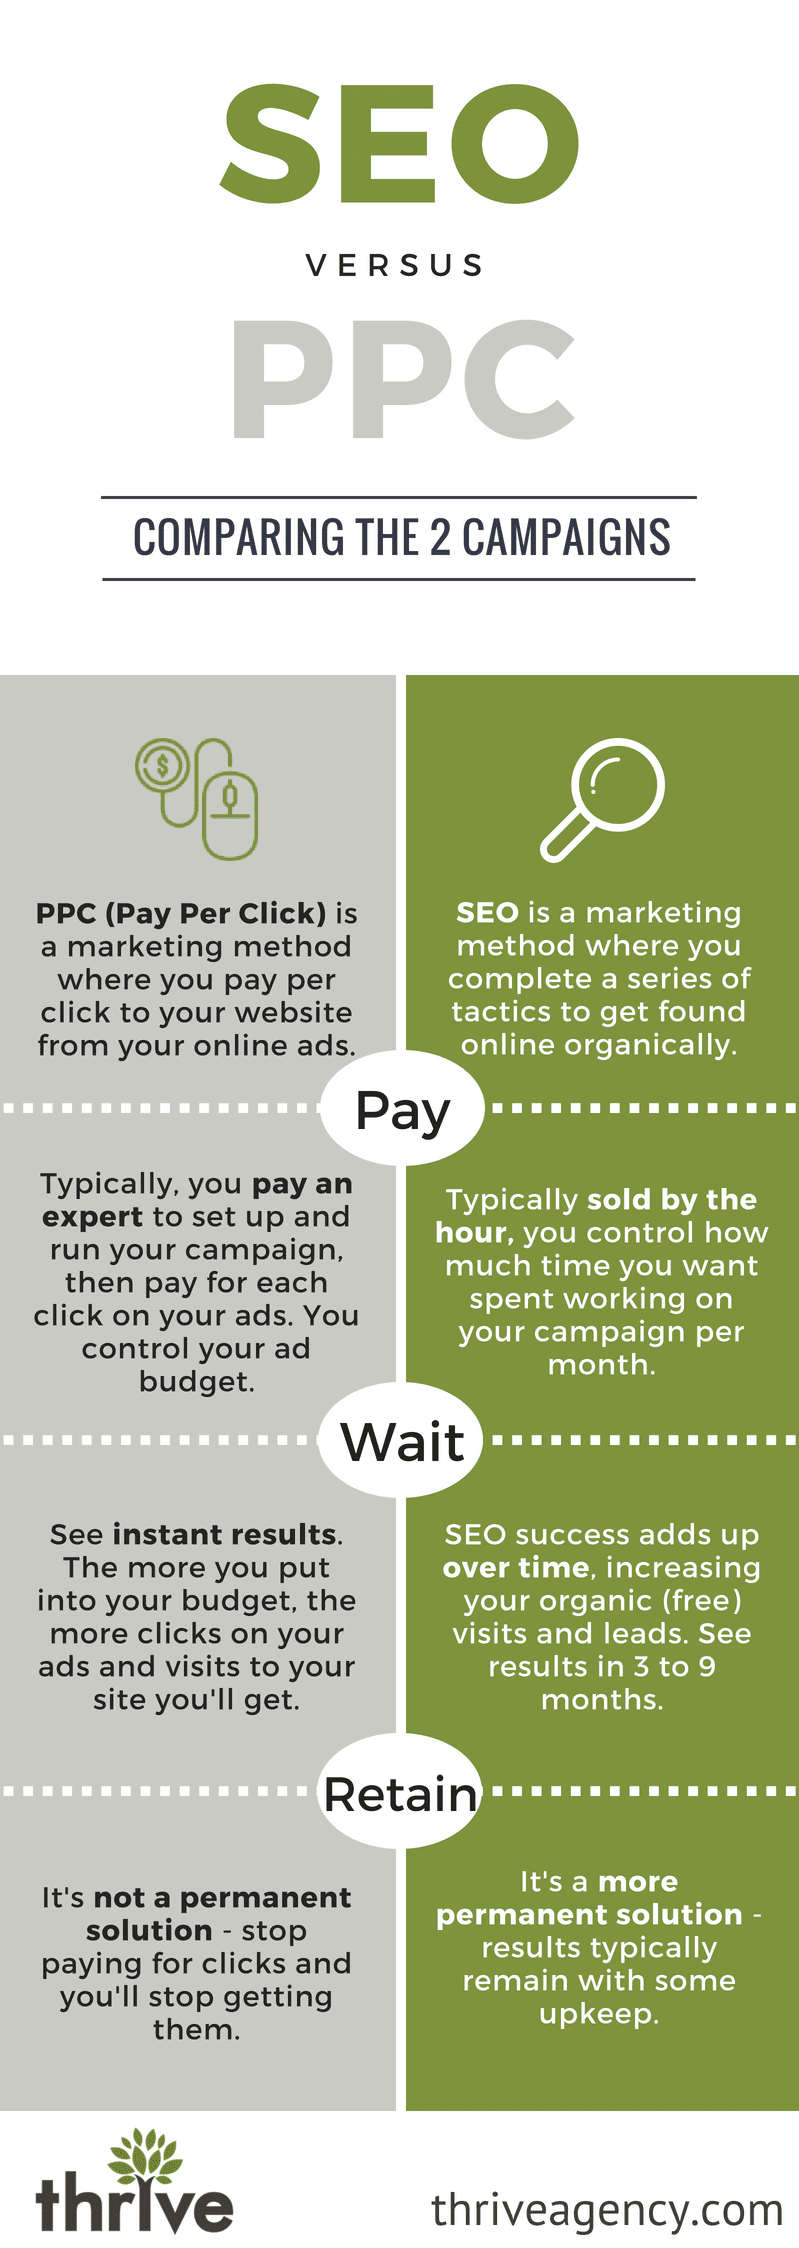 Does Pay Per Click Help Seo?